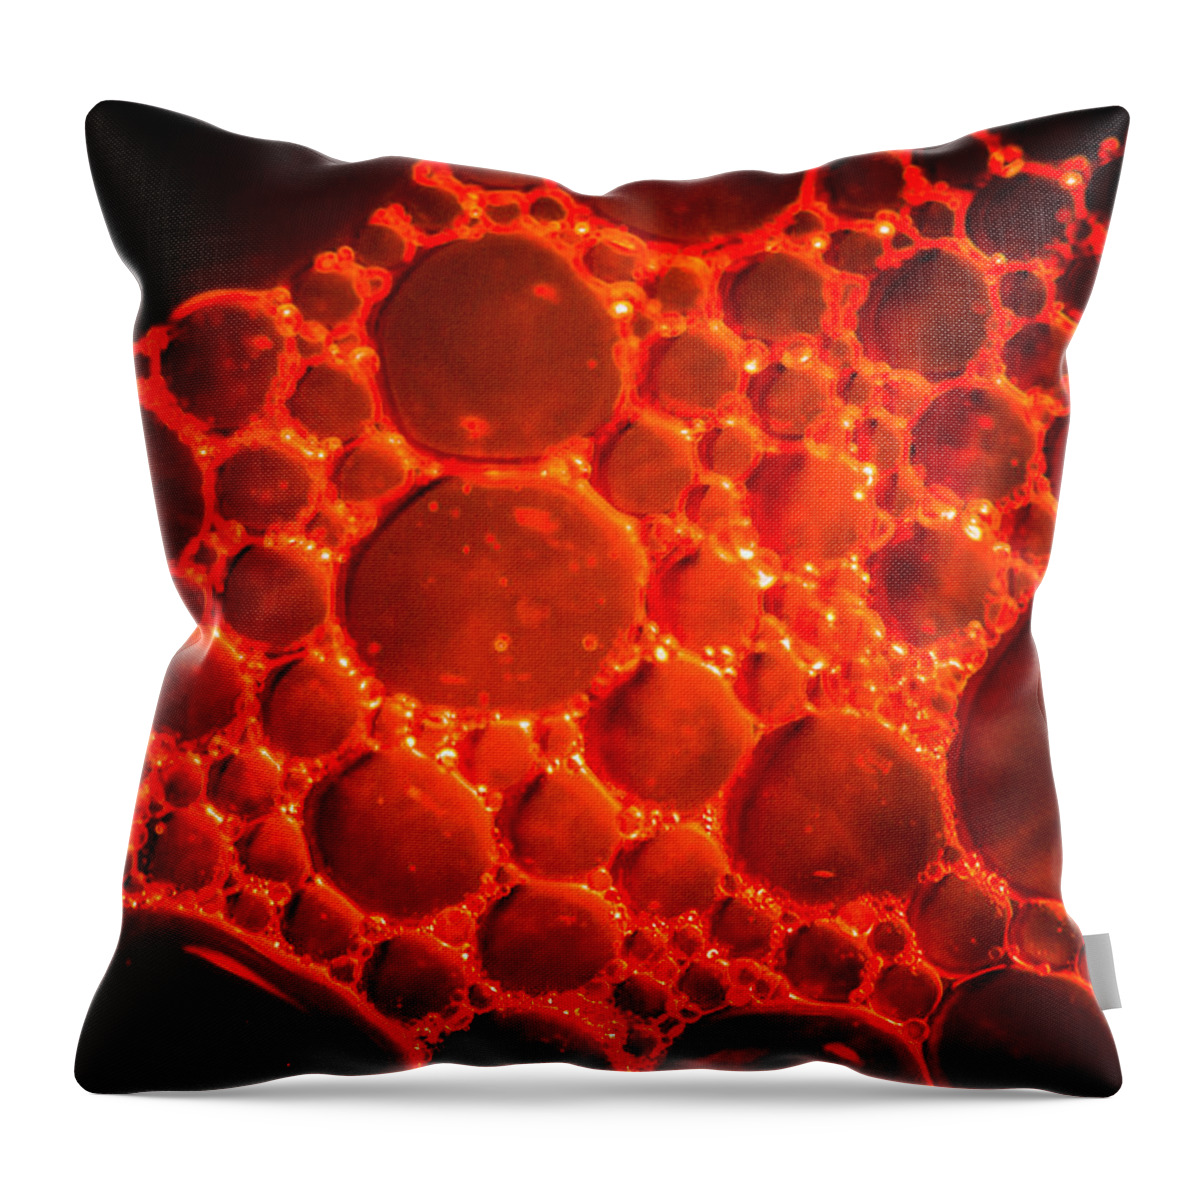 Oil Throw Pillow featuring the photograph Black Rock Lava by Bruce Pritchett